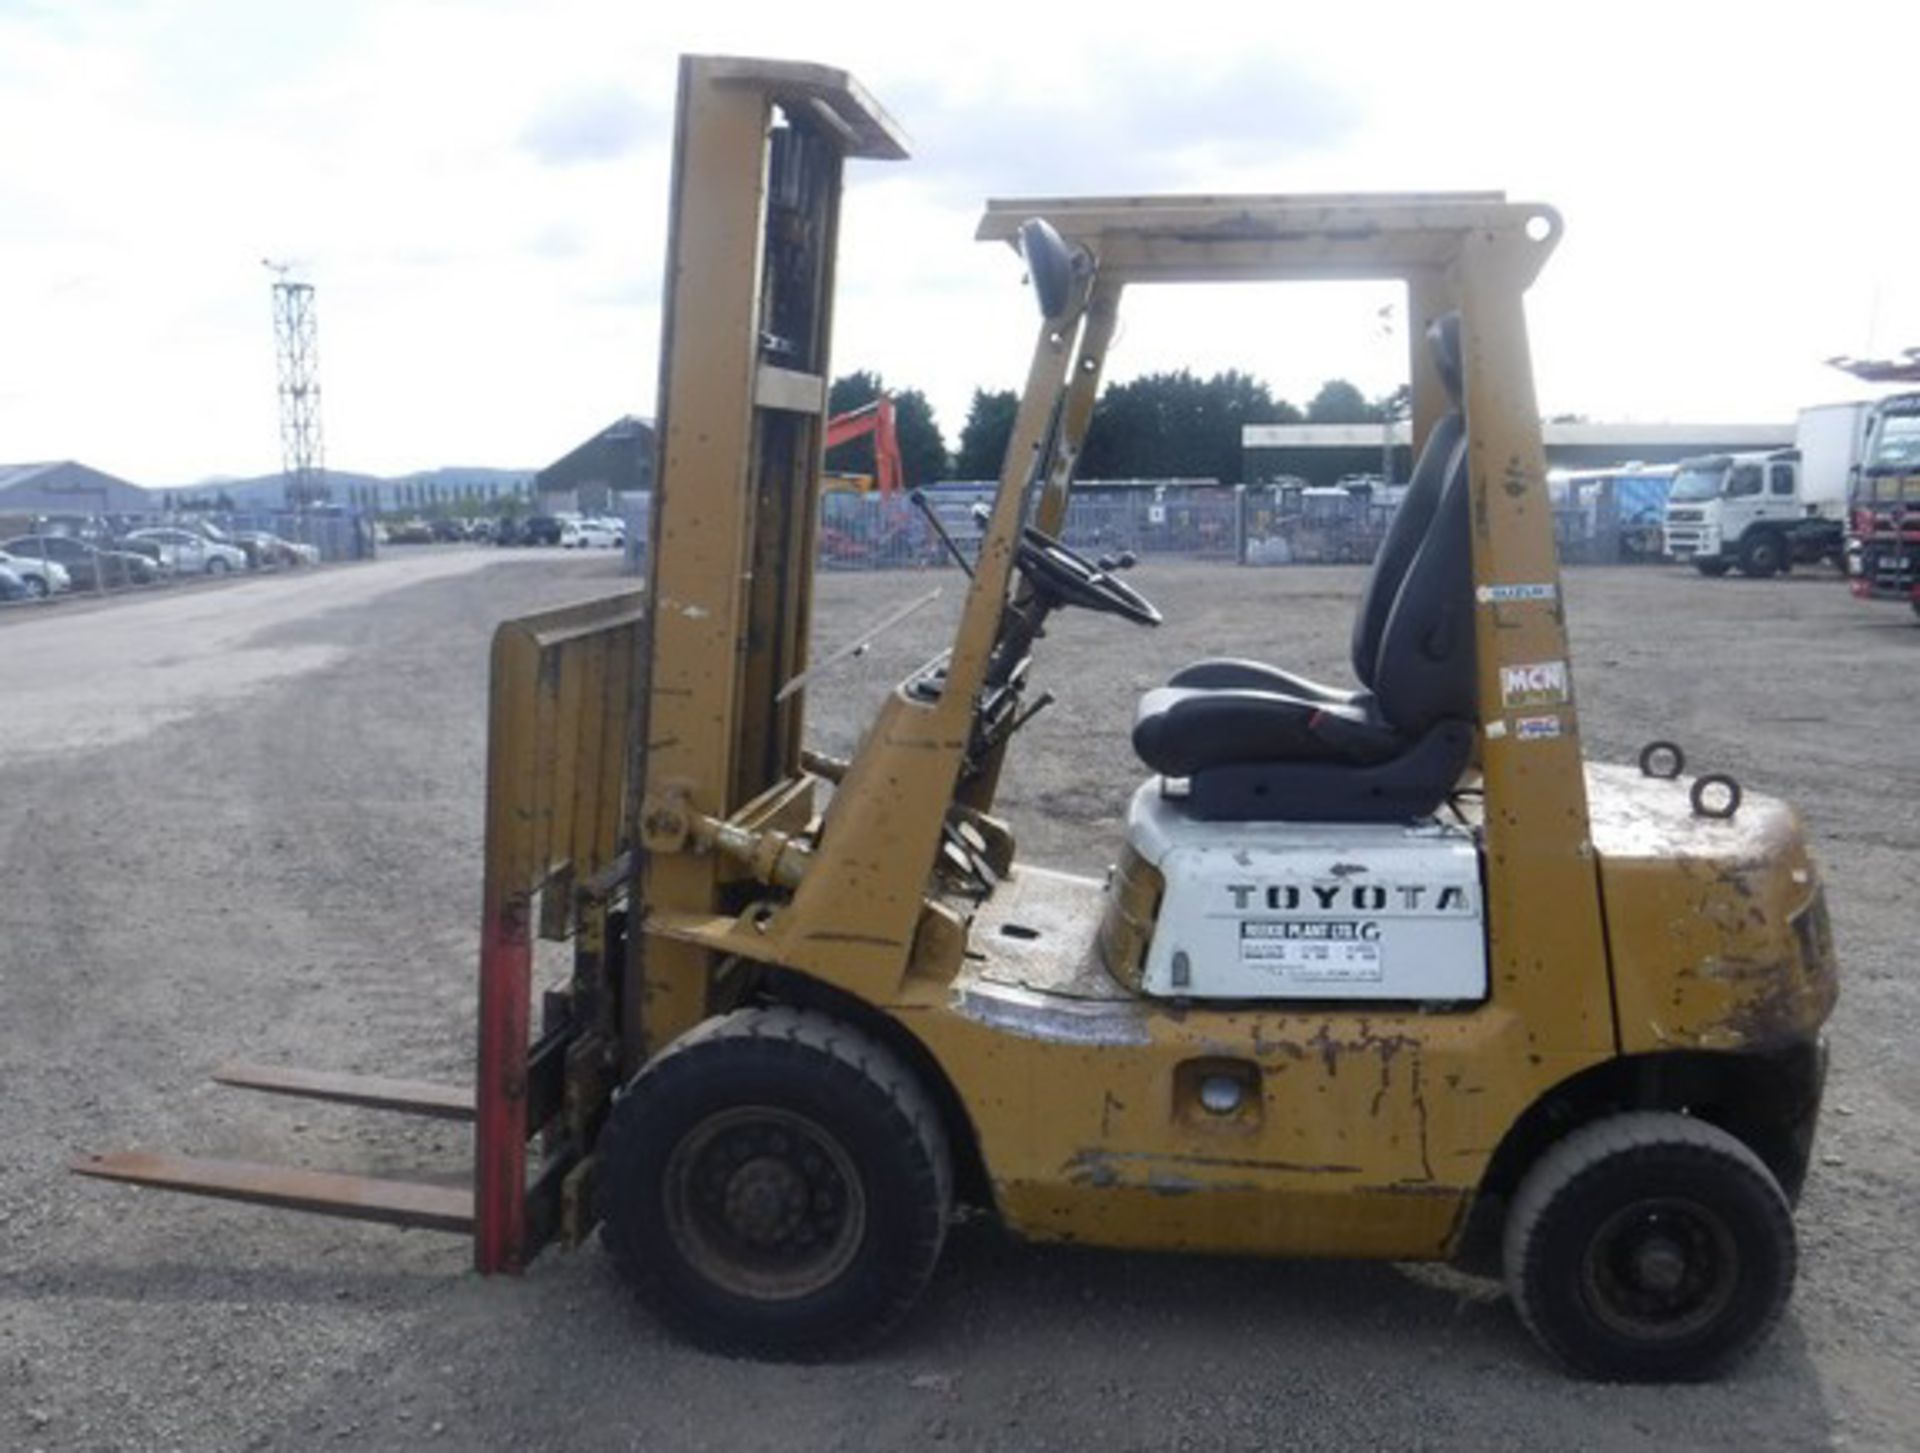 TOYOTA diesel forklift, 285hrs (not verified) - Image 11 of 12